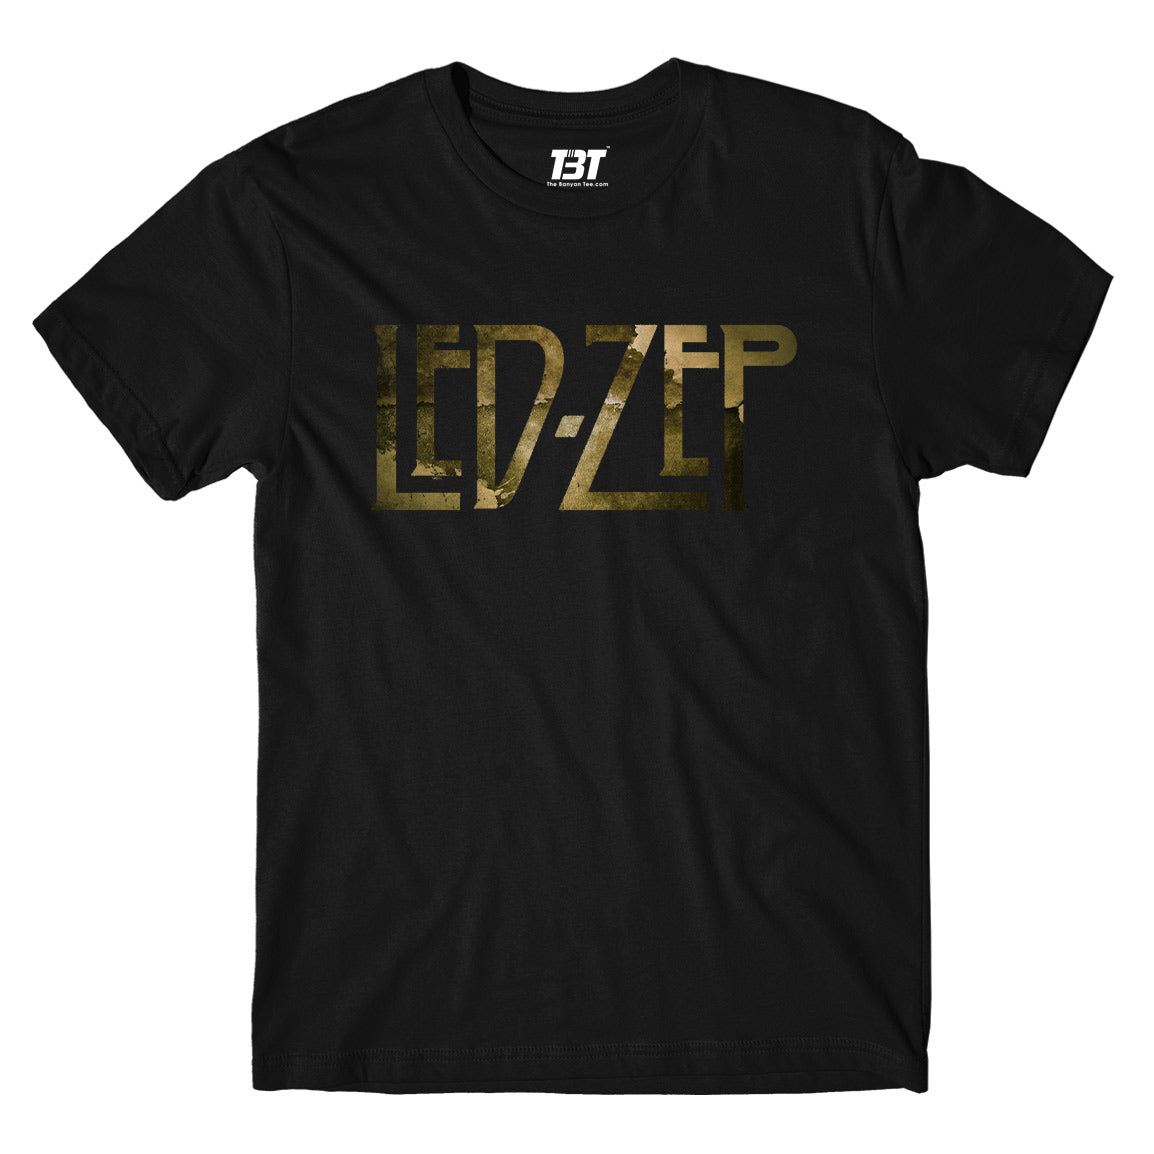 Led Zeppelin T shirt - Led Zep | The Banyan Tee | Reviews on Judge.me